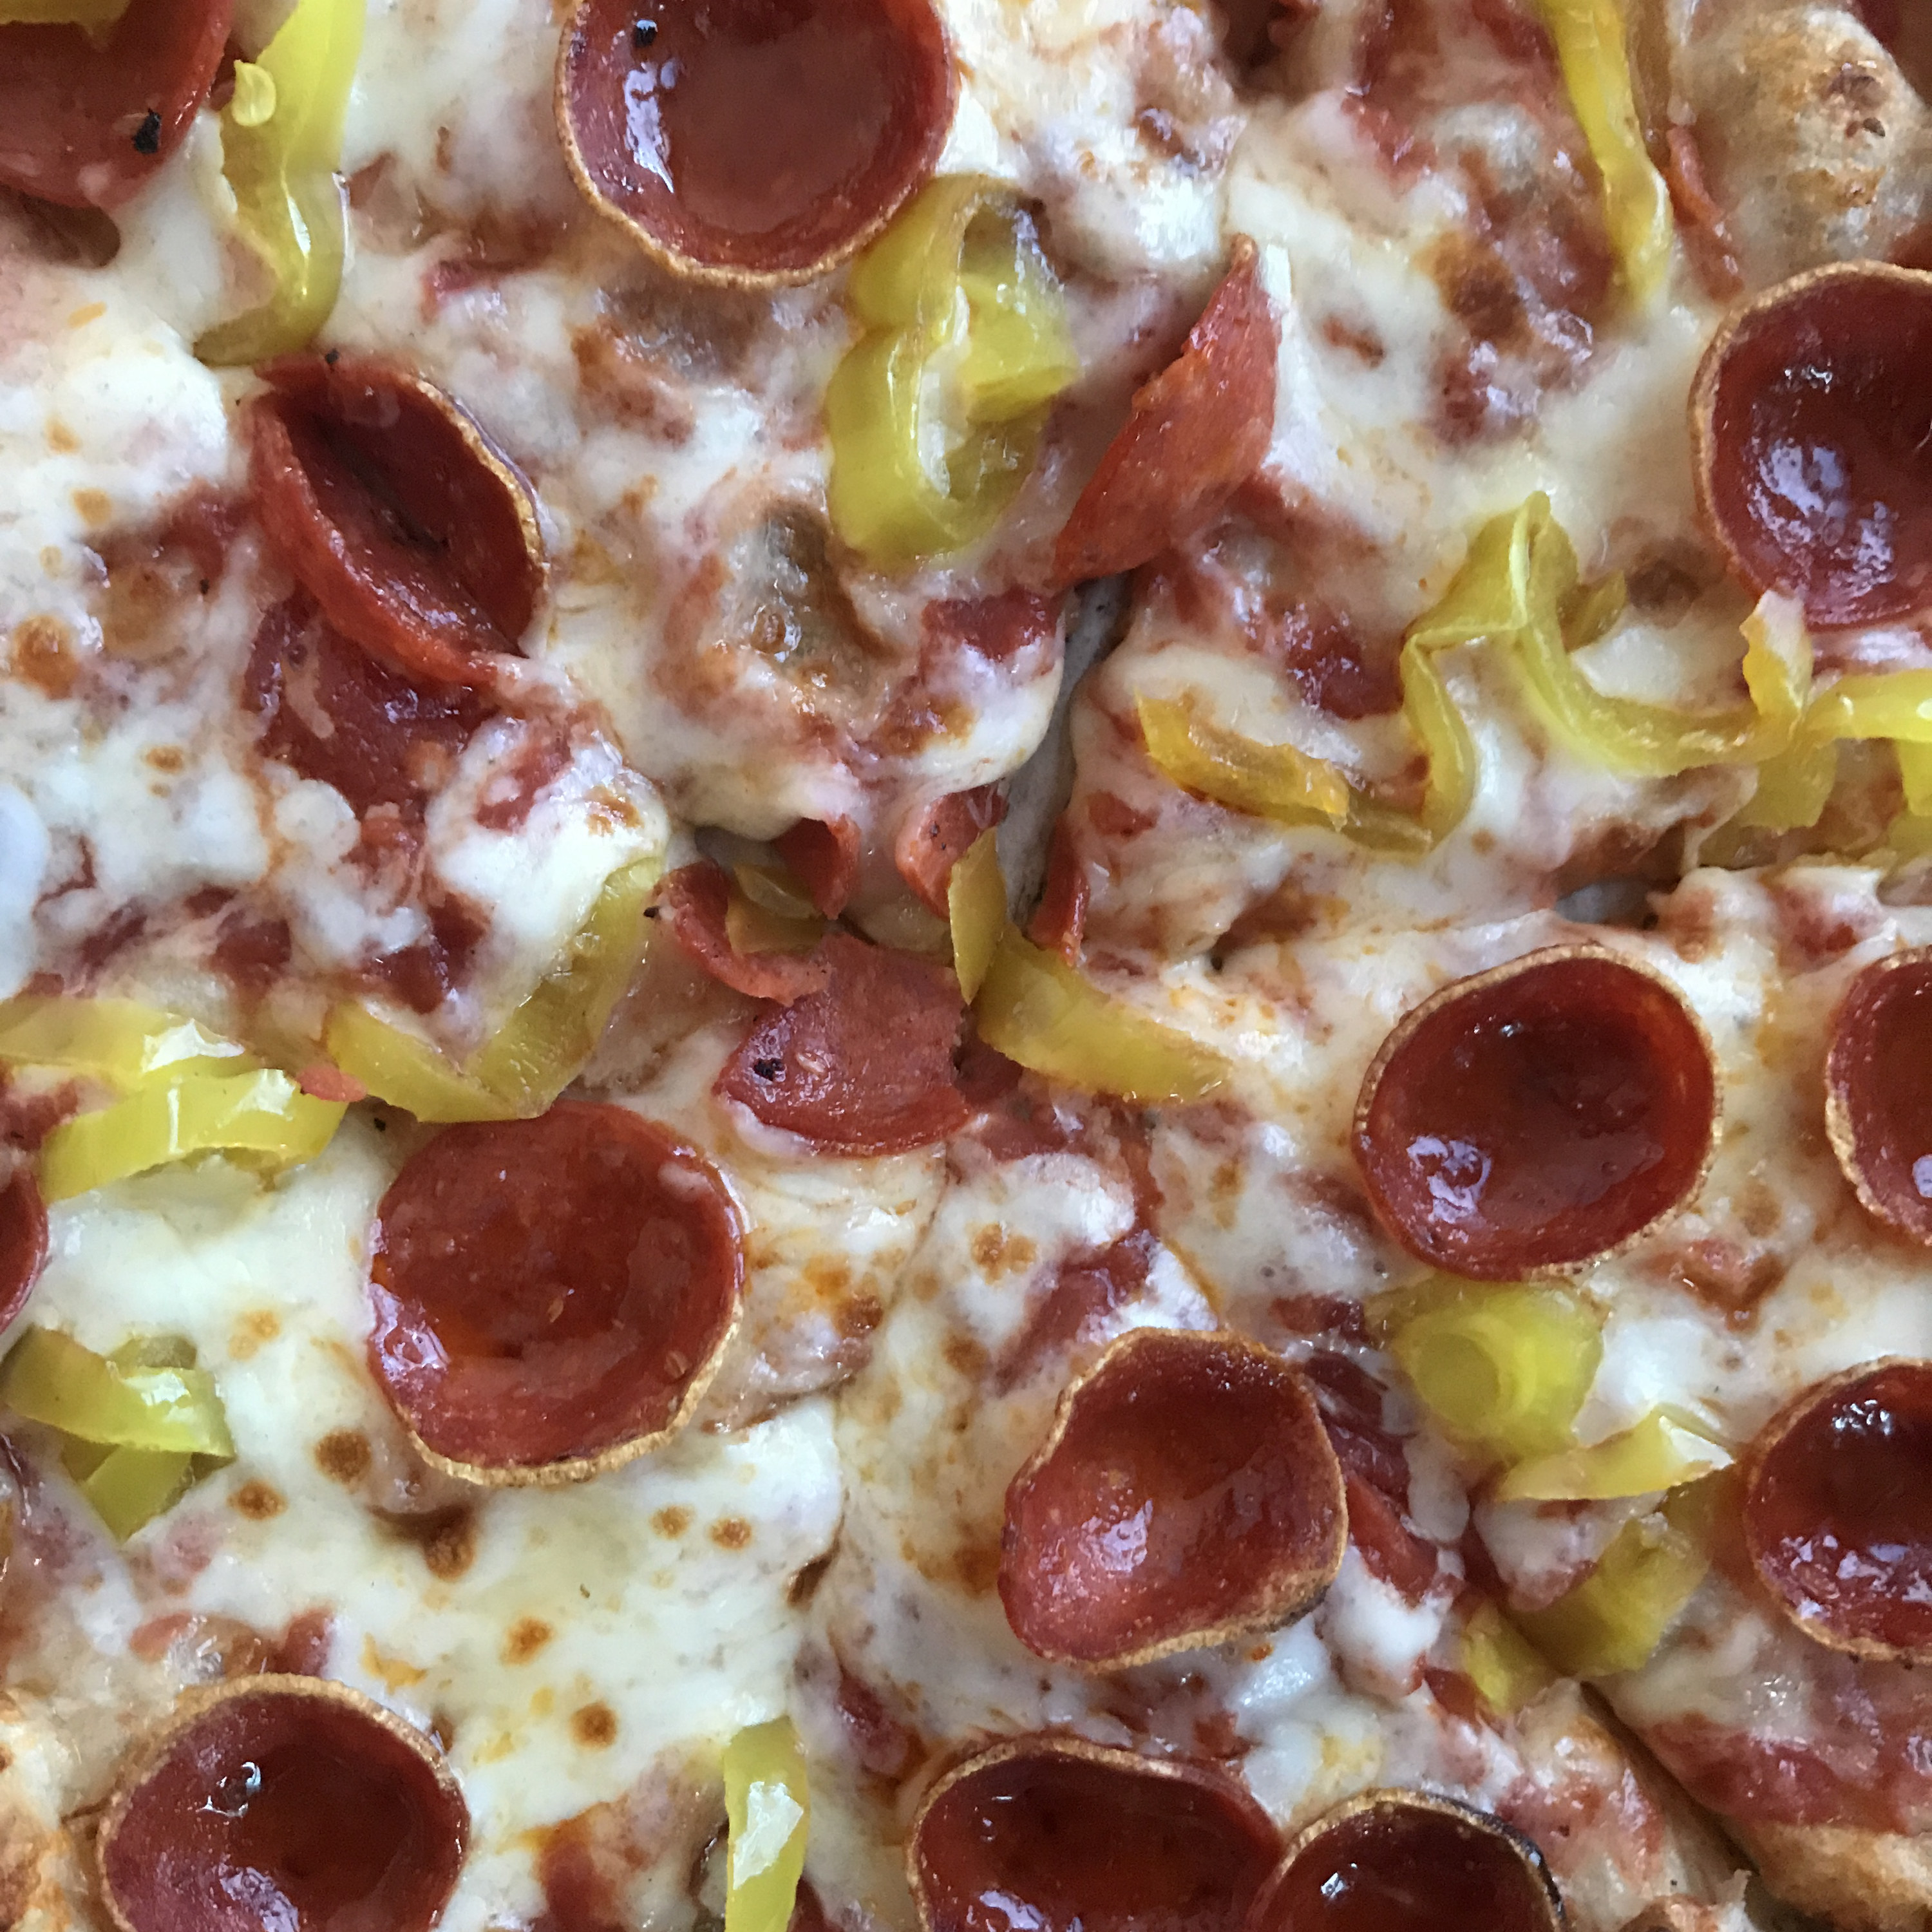 A pizza with pepperoni and banana peppers